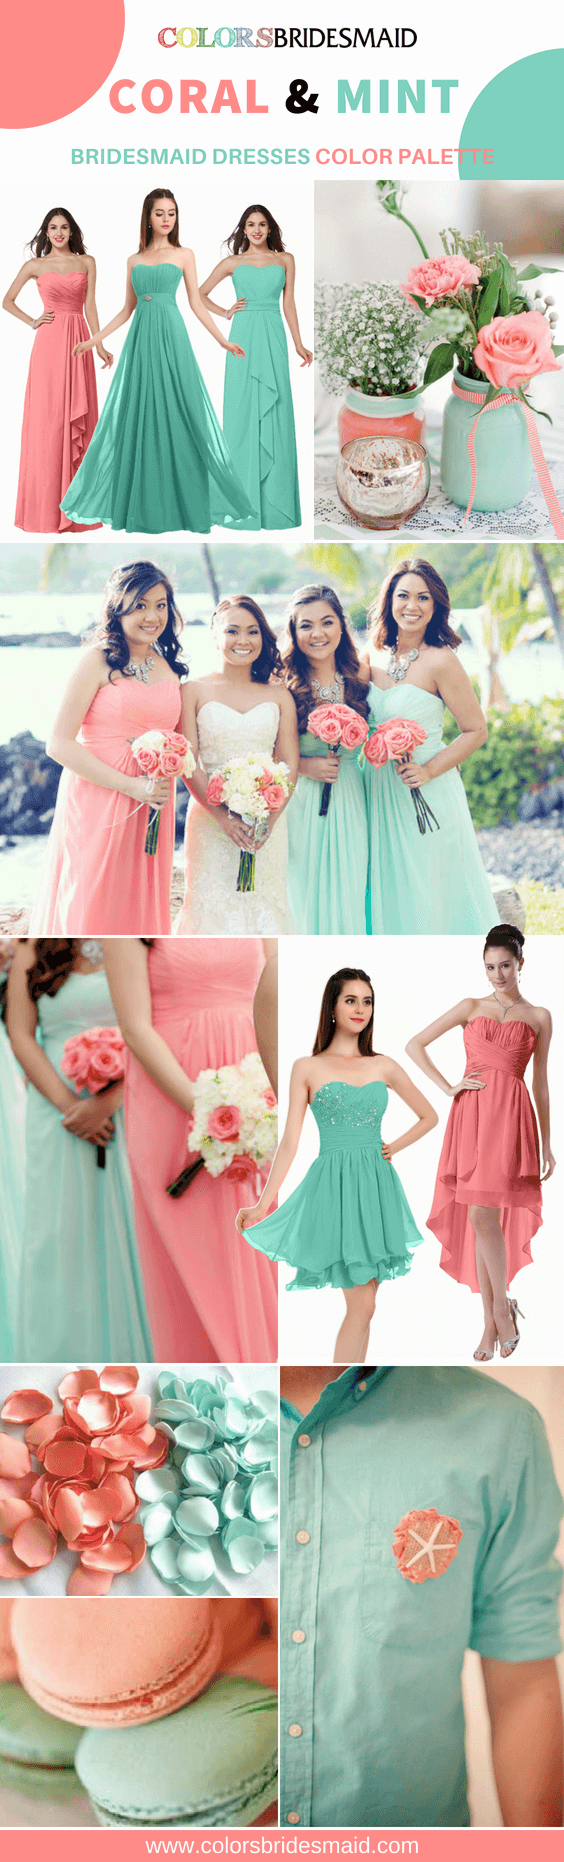 coral and mint bridesmaid dresses